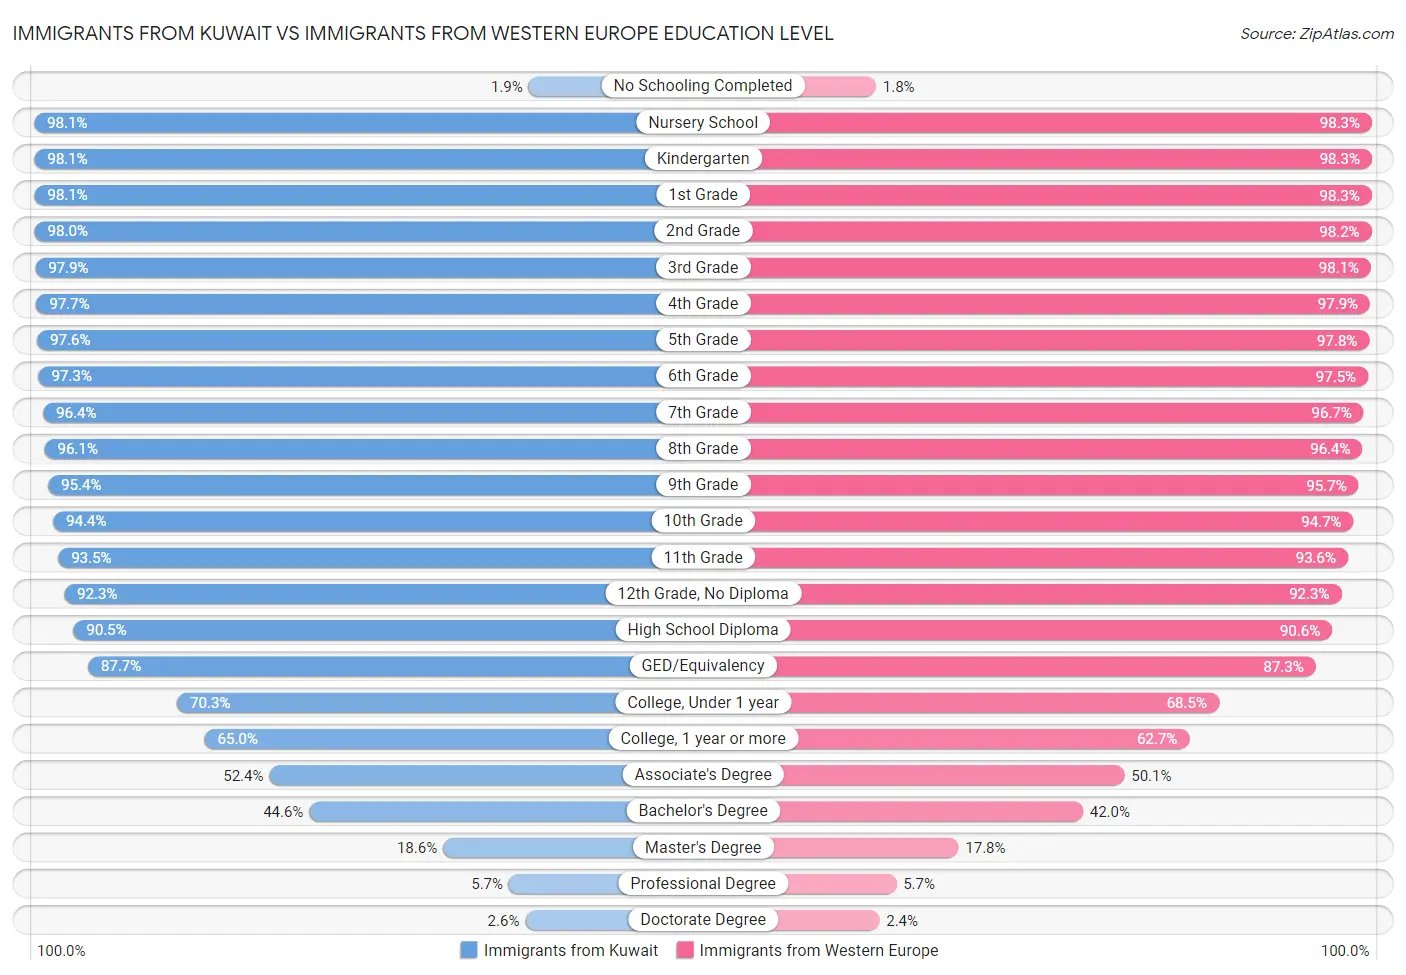 Immigrants from Kuwait vs Immigrants from Western Europe Education Level